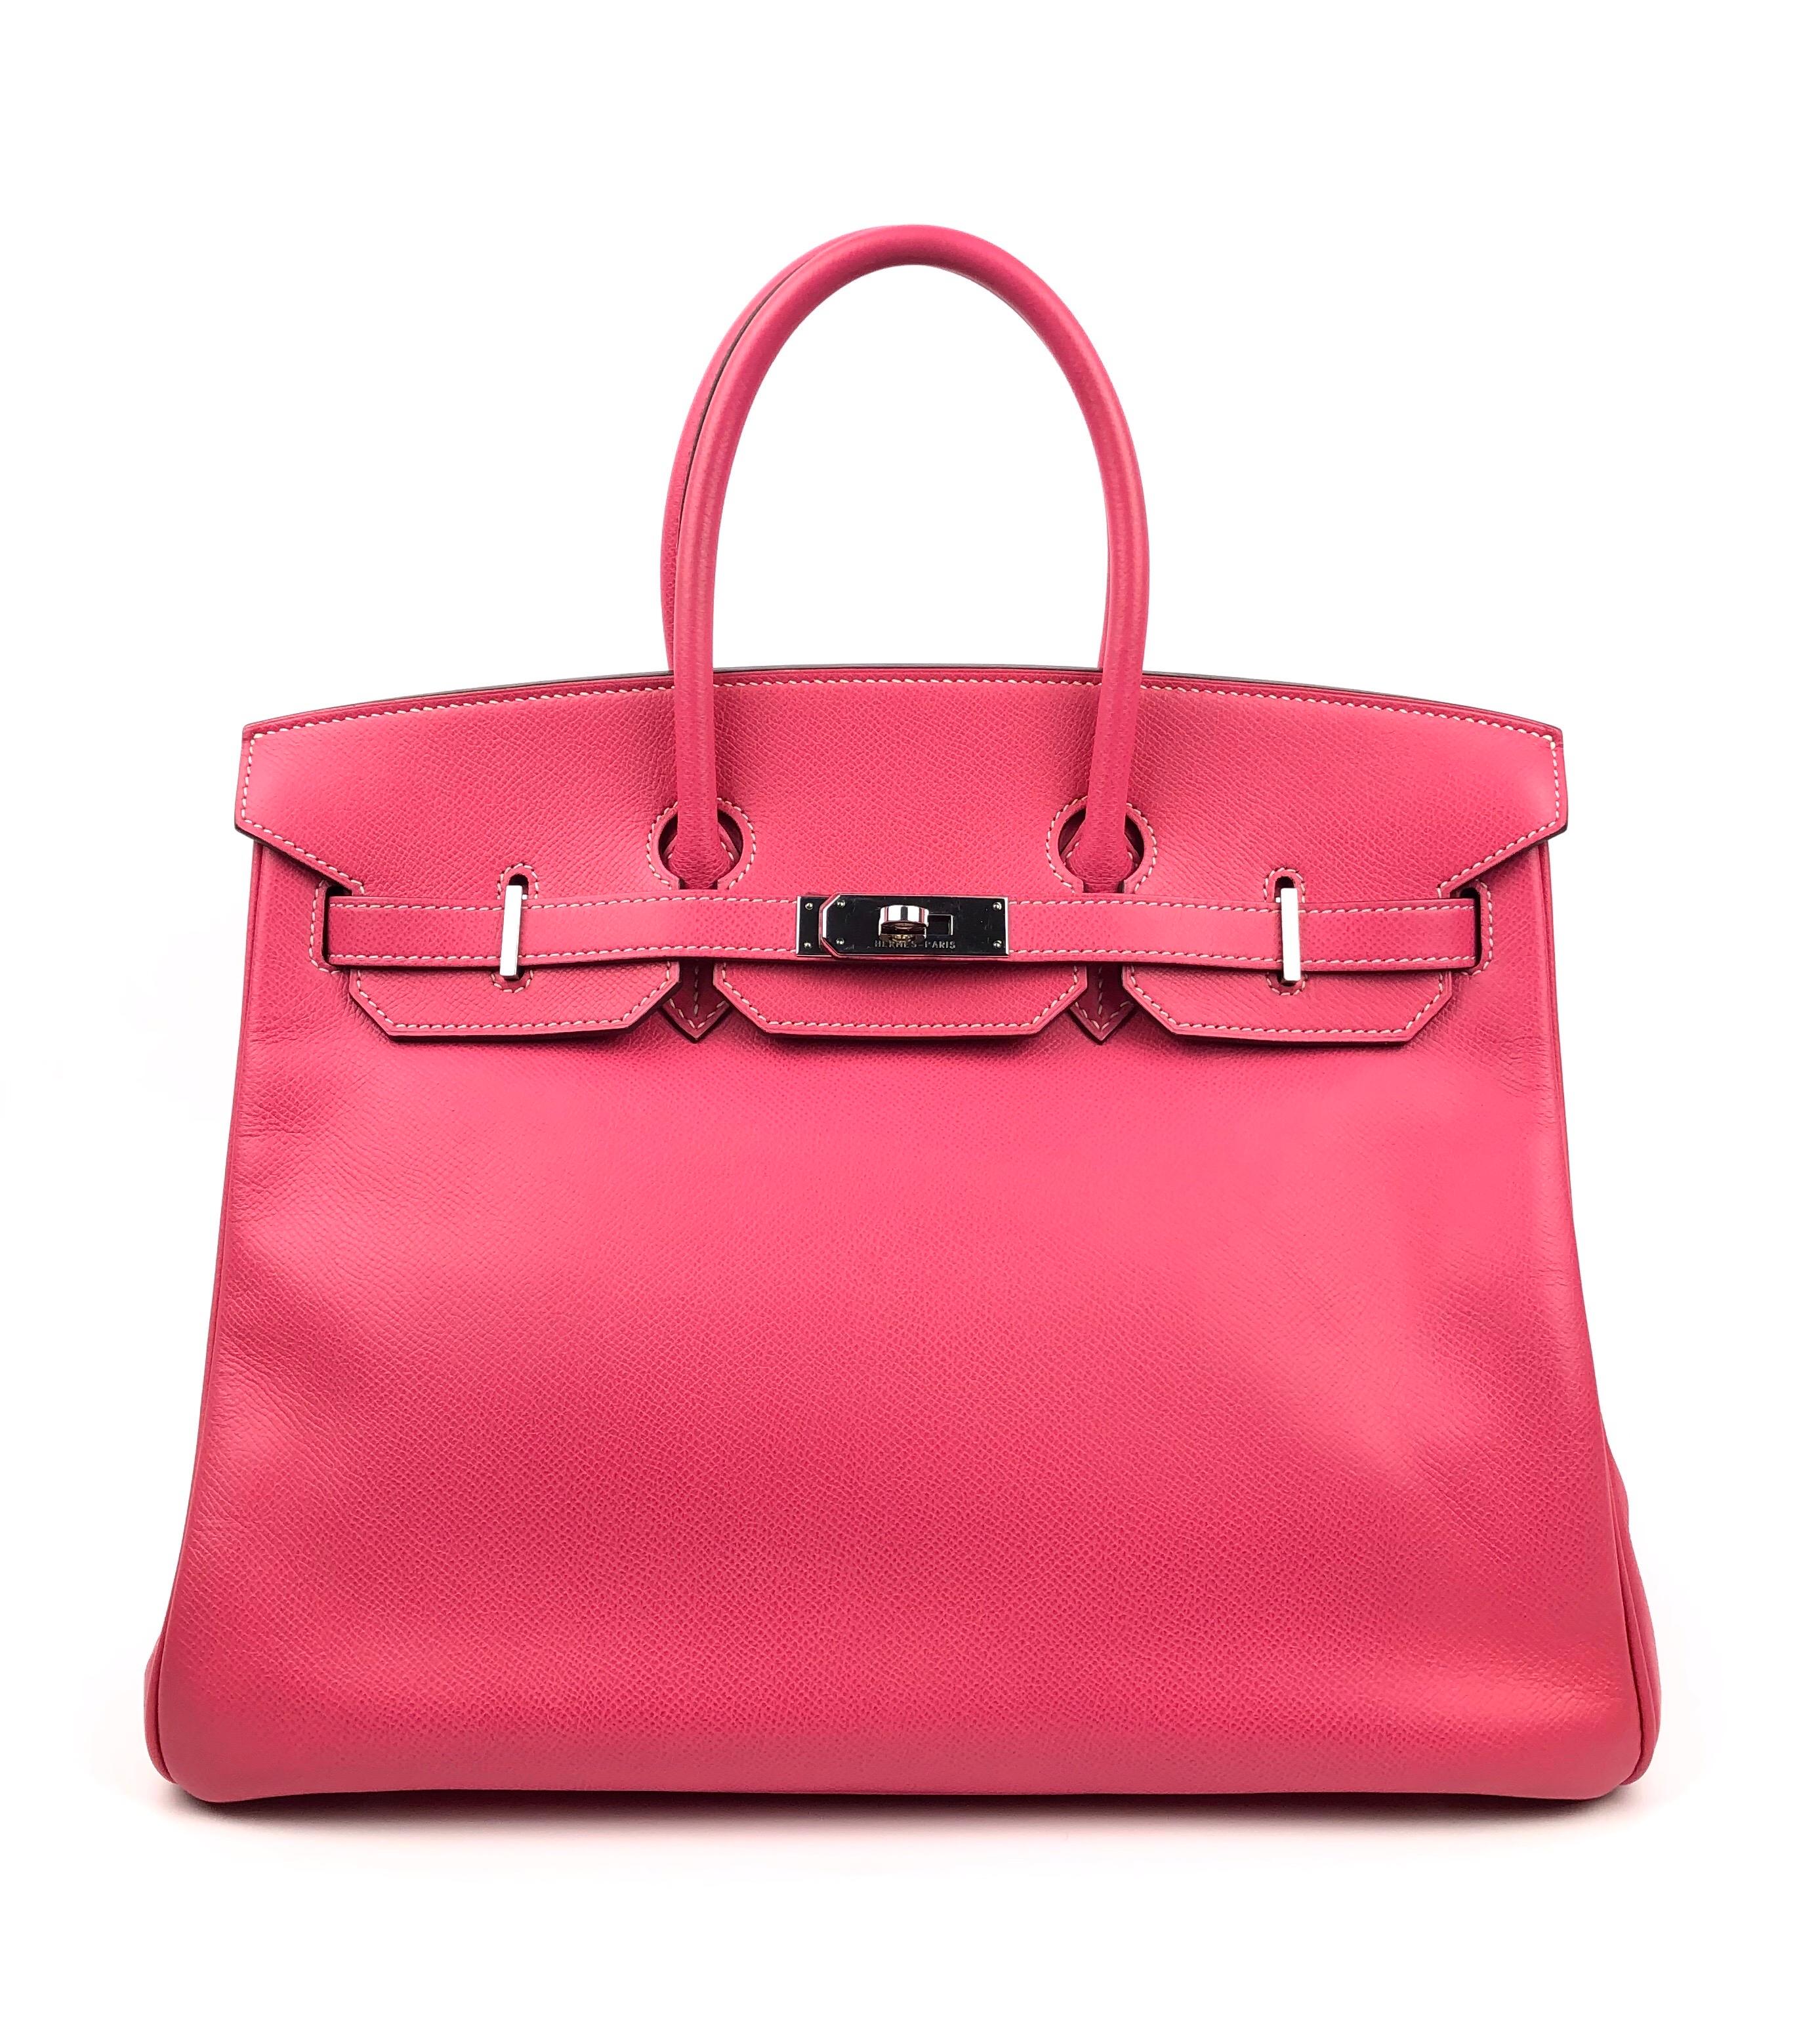 Hermes Birkin 35 Rose Tyrien Pink Candy Collection Rubis Interior Palladium Hardware. Excellent Condition, Some scratching on hardware.

Shop with Confidence from Lux Addicts. Authenticity Guaranteed! 